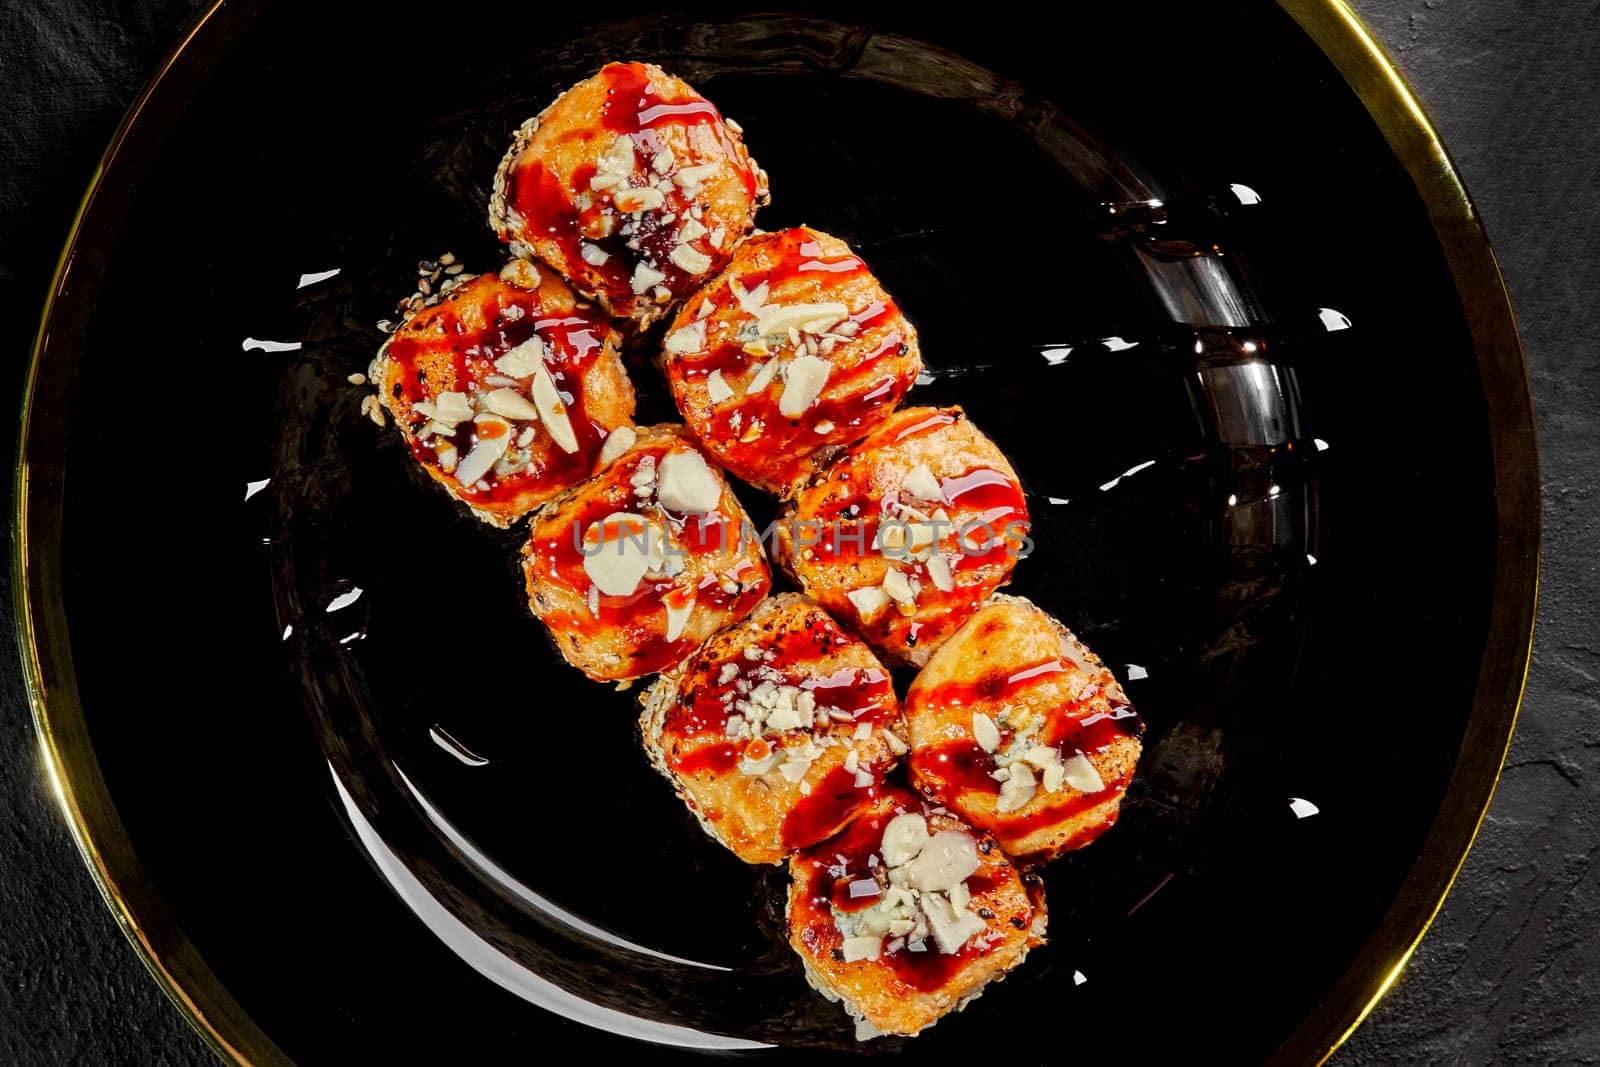 Top view of browned baked cheese caps of appetizing sushi rolls drizzled with tangy uramaki sauce and sprinkled with Parmesan crumbs, served on black and gold plate